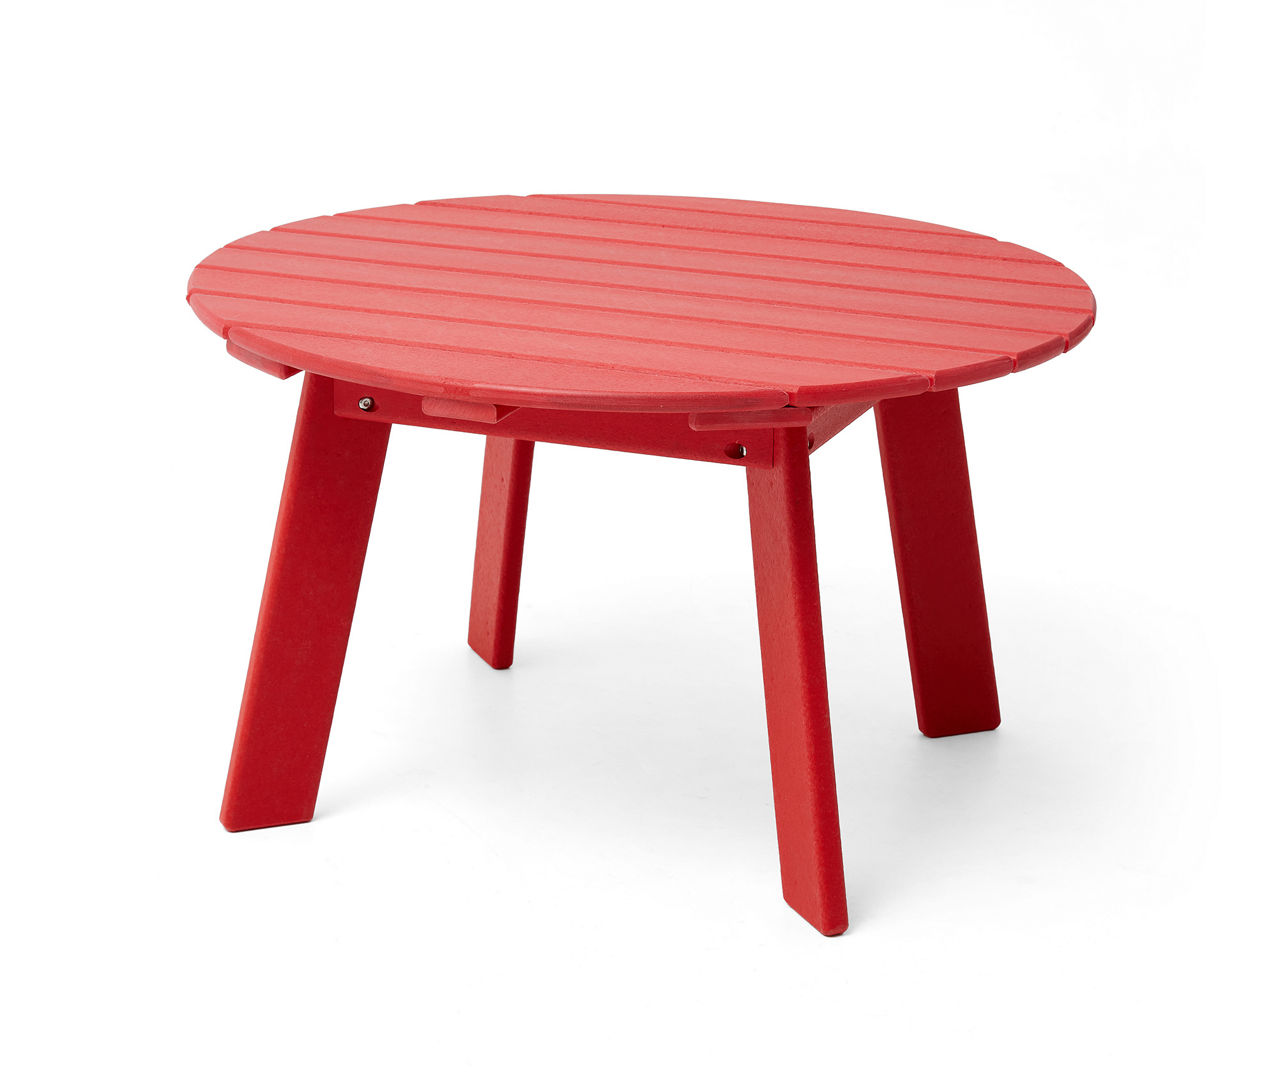 32" Red Adirondack Outdoor Coffee Table